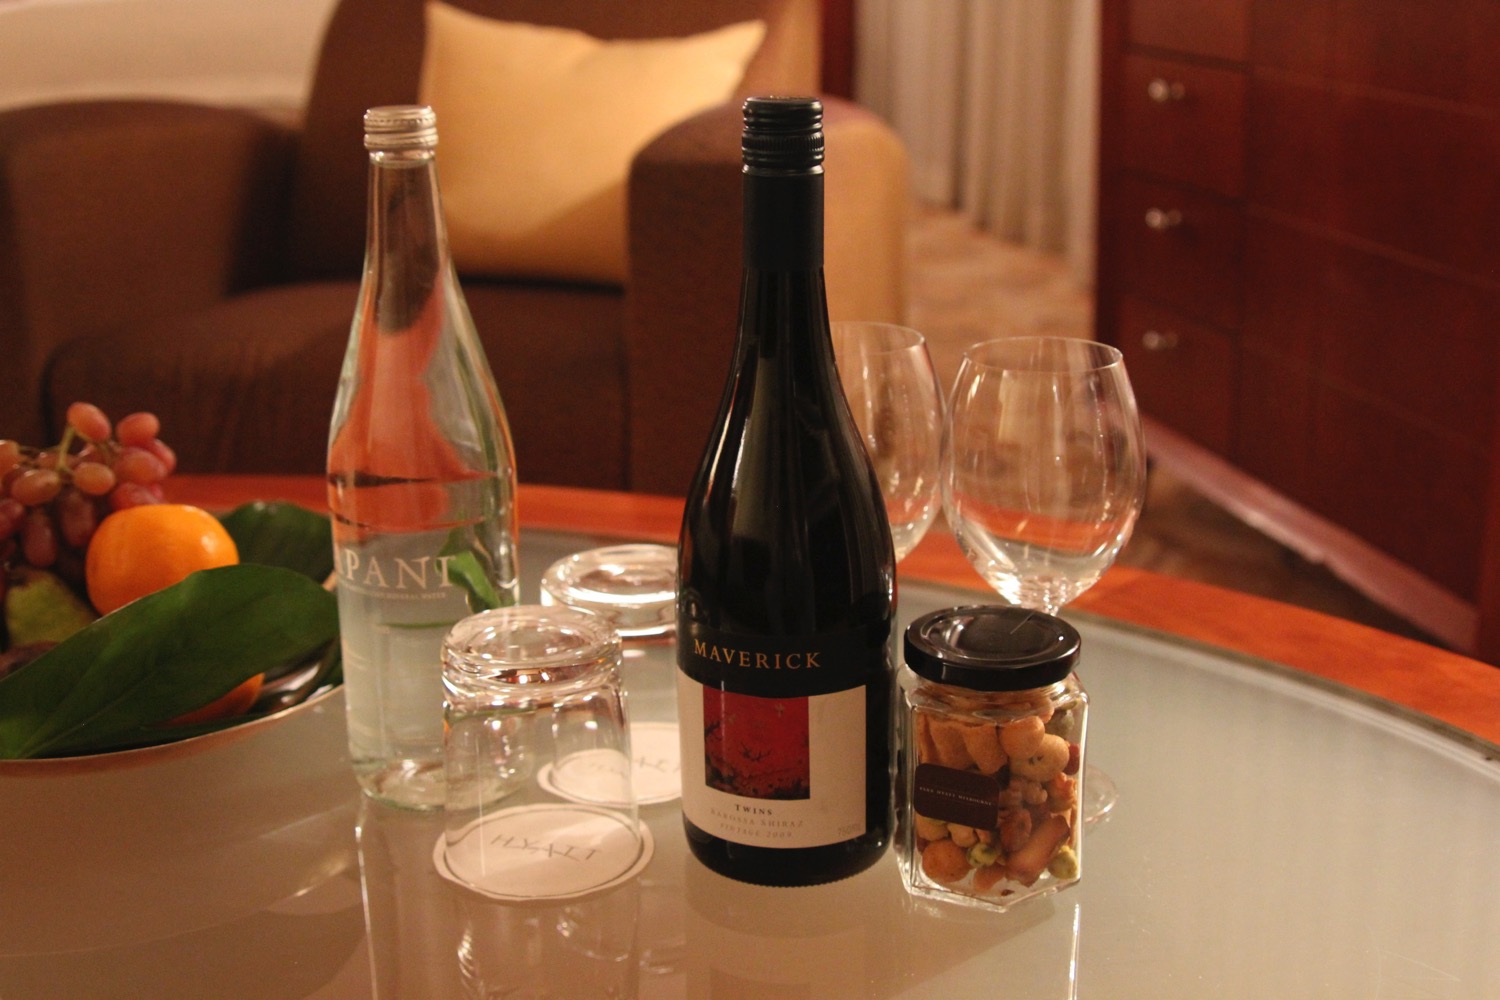 a bottle and glasses on a table